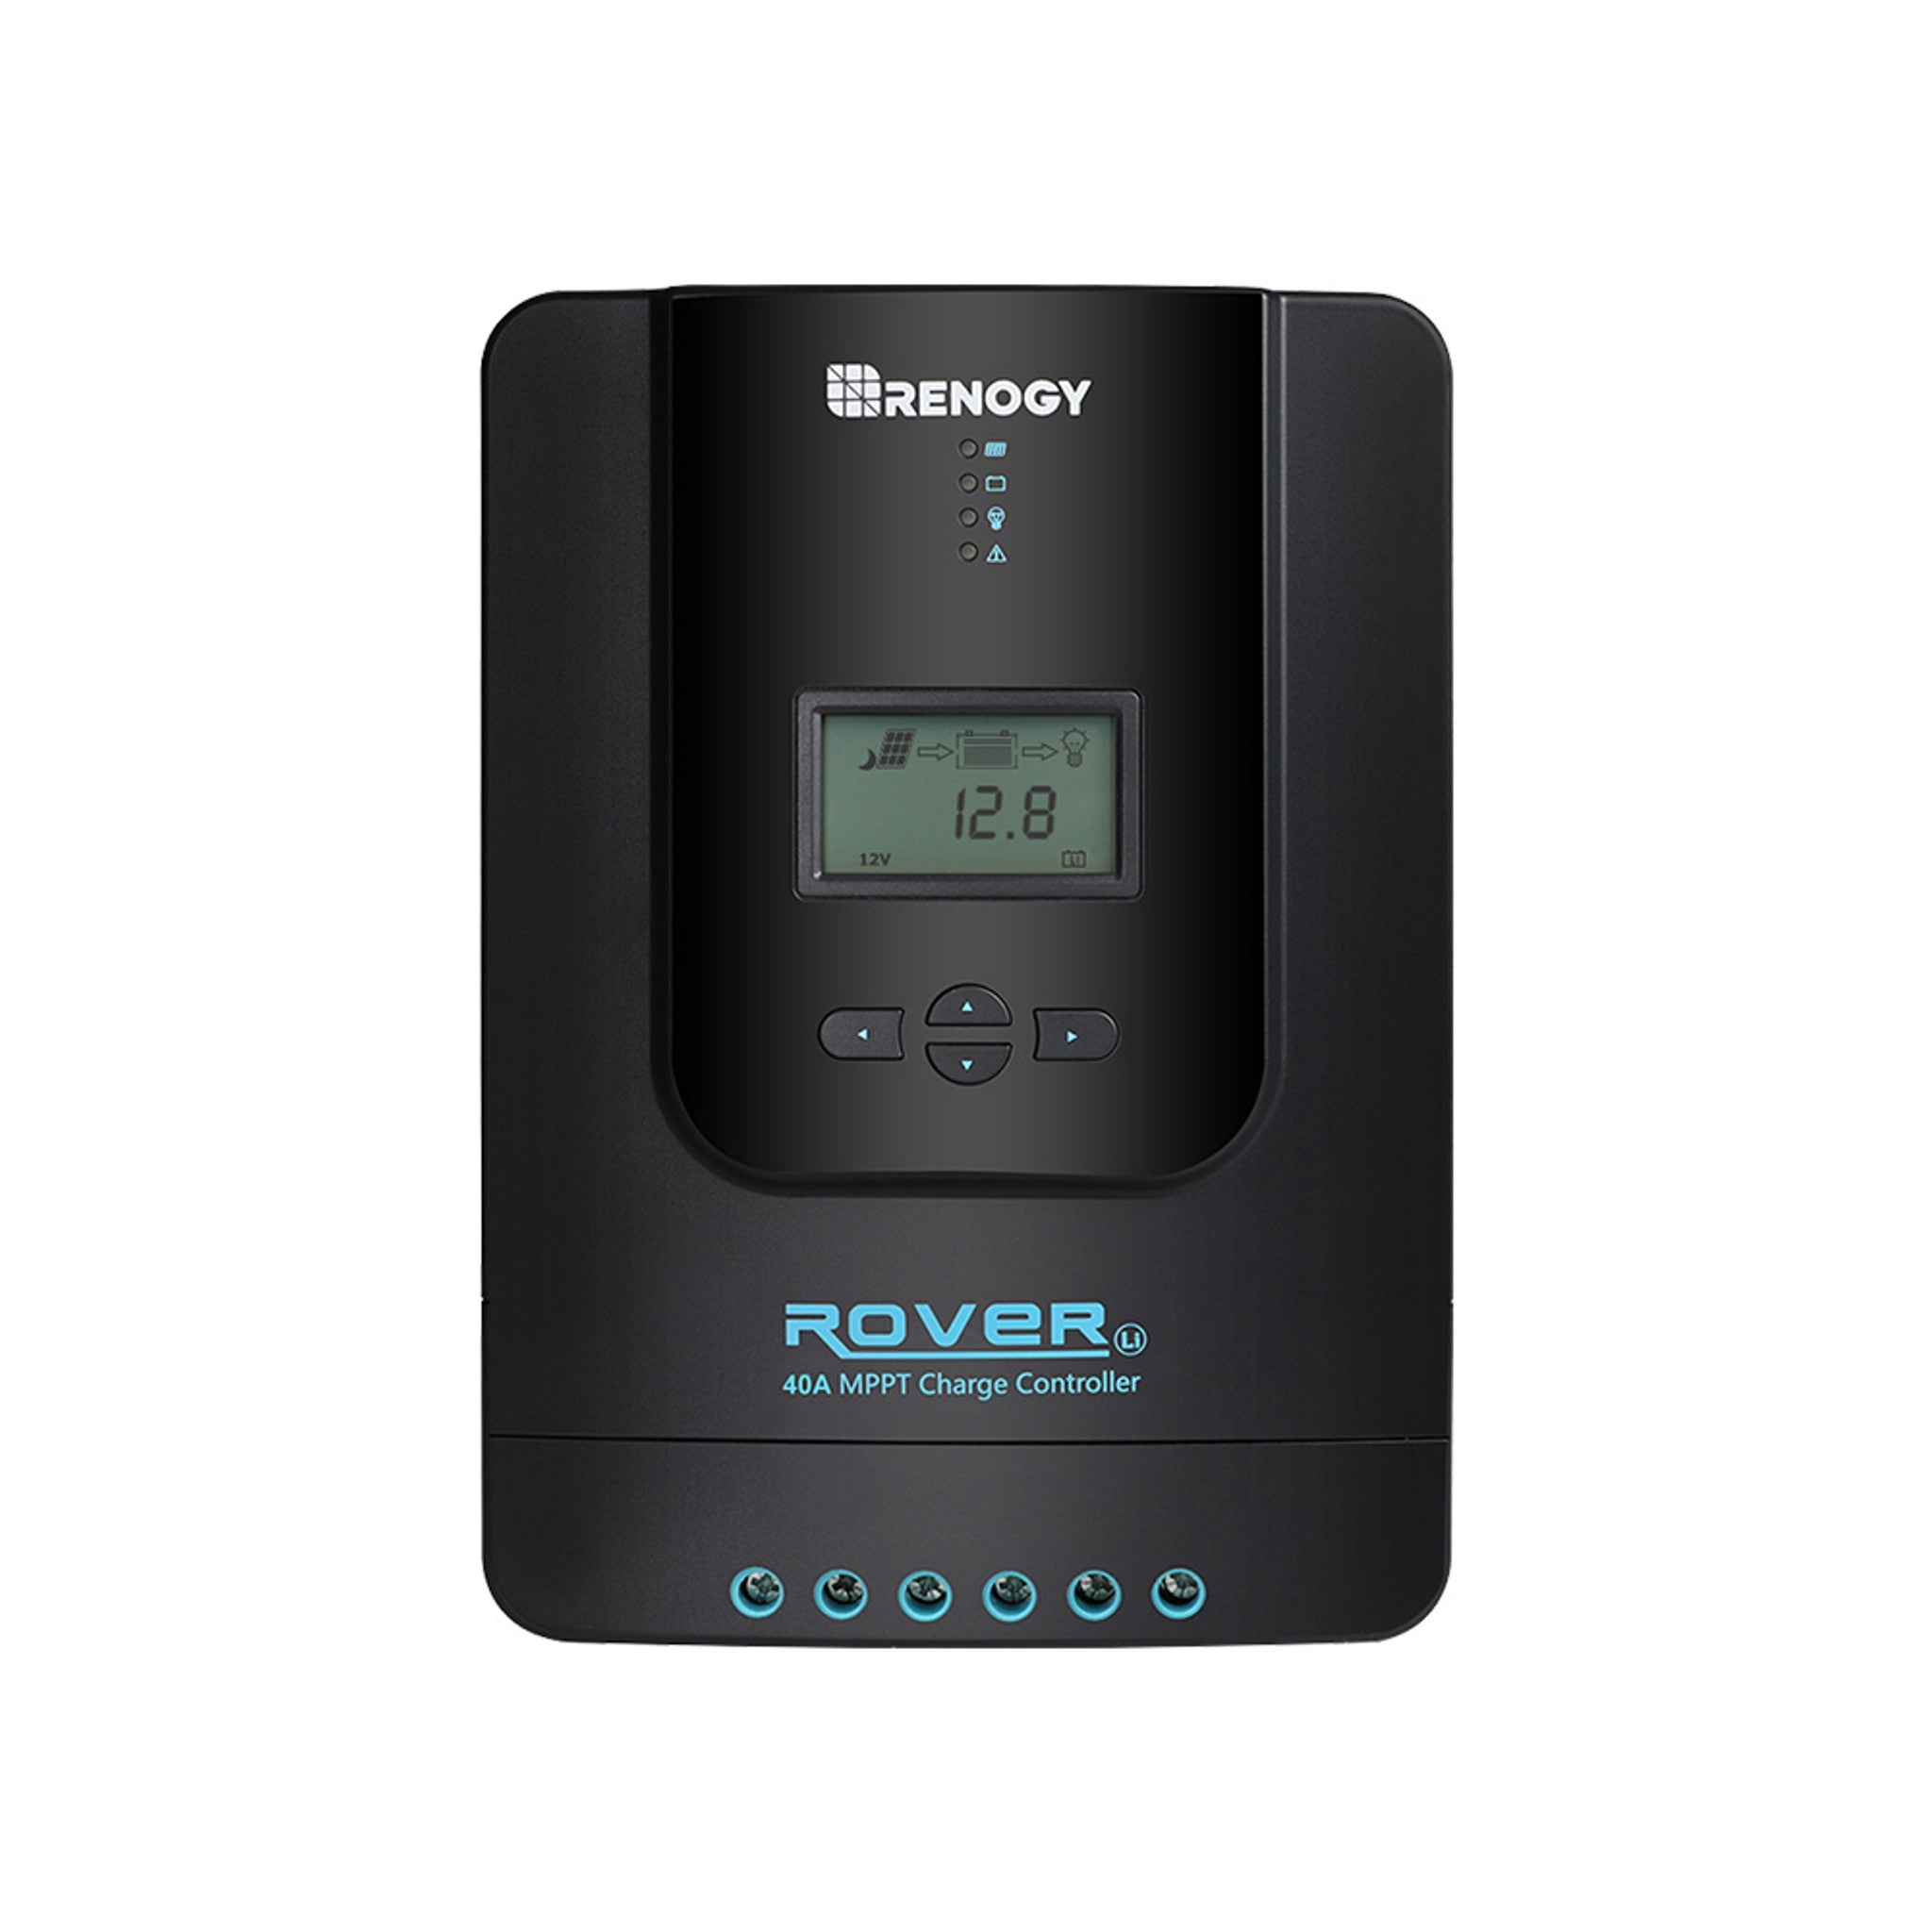 Renogy Rover Li 40 Amp MPPT Solar Charge Controller with Bluetooth Module